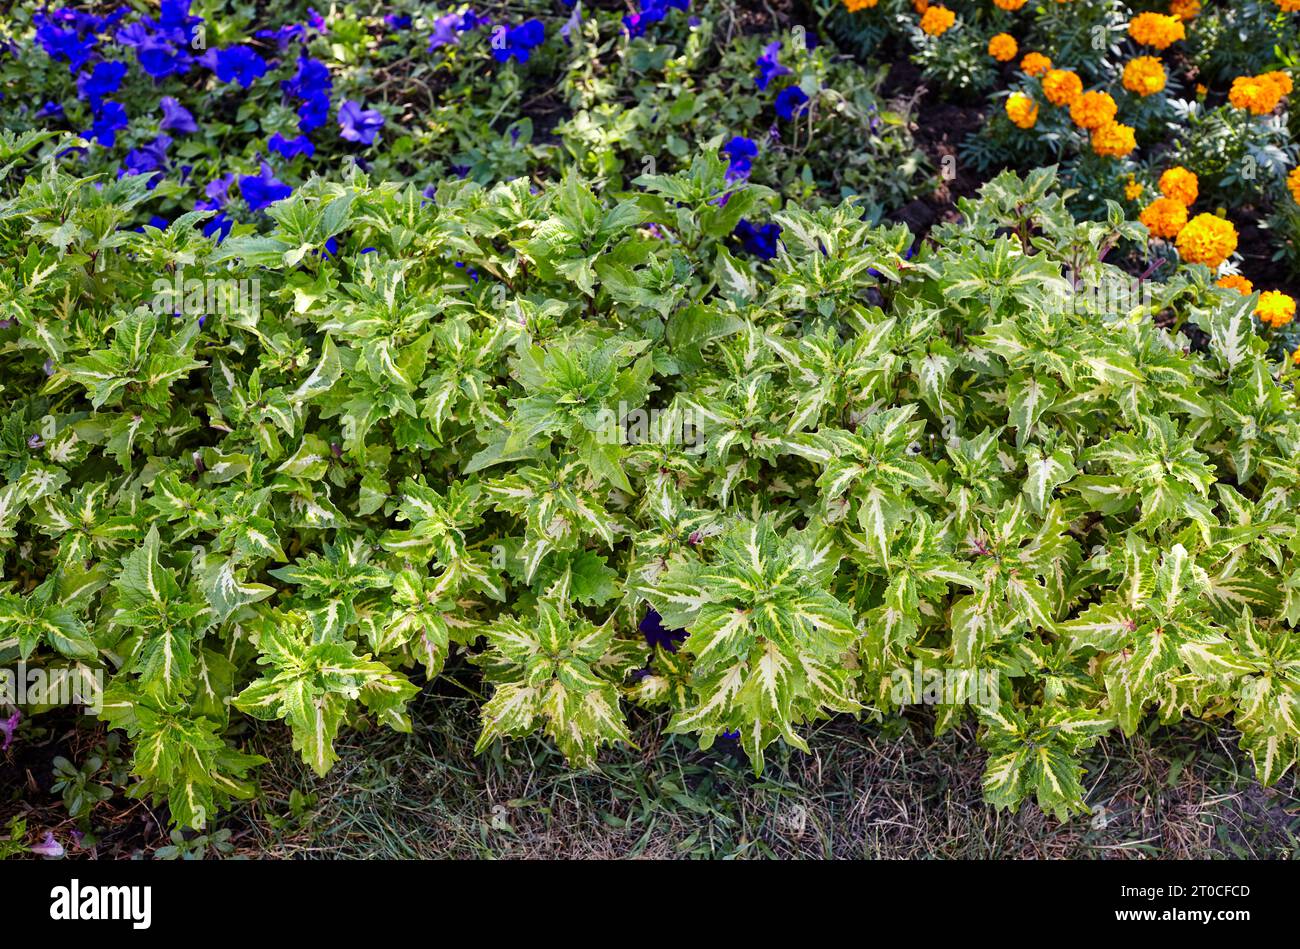 Plectranthus (White Edged Swedish Ivy) in city garden. Lush blooming colorful common garden flowers in city park. Selective focus Stock Photo